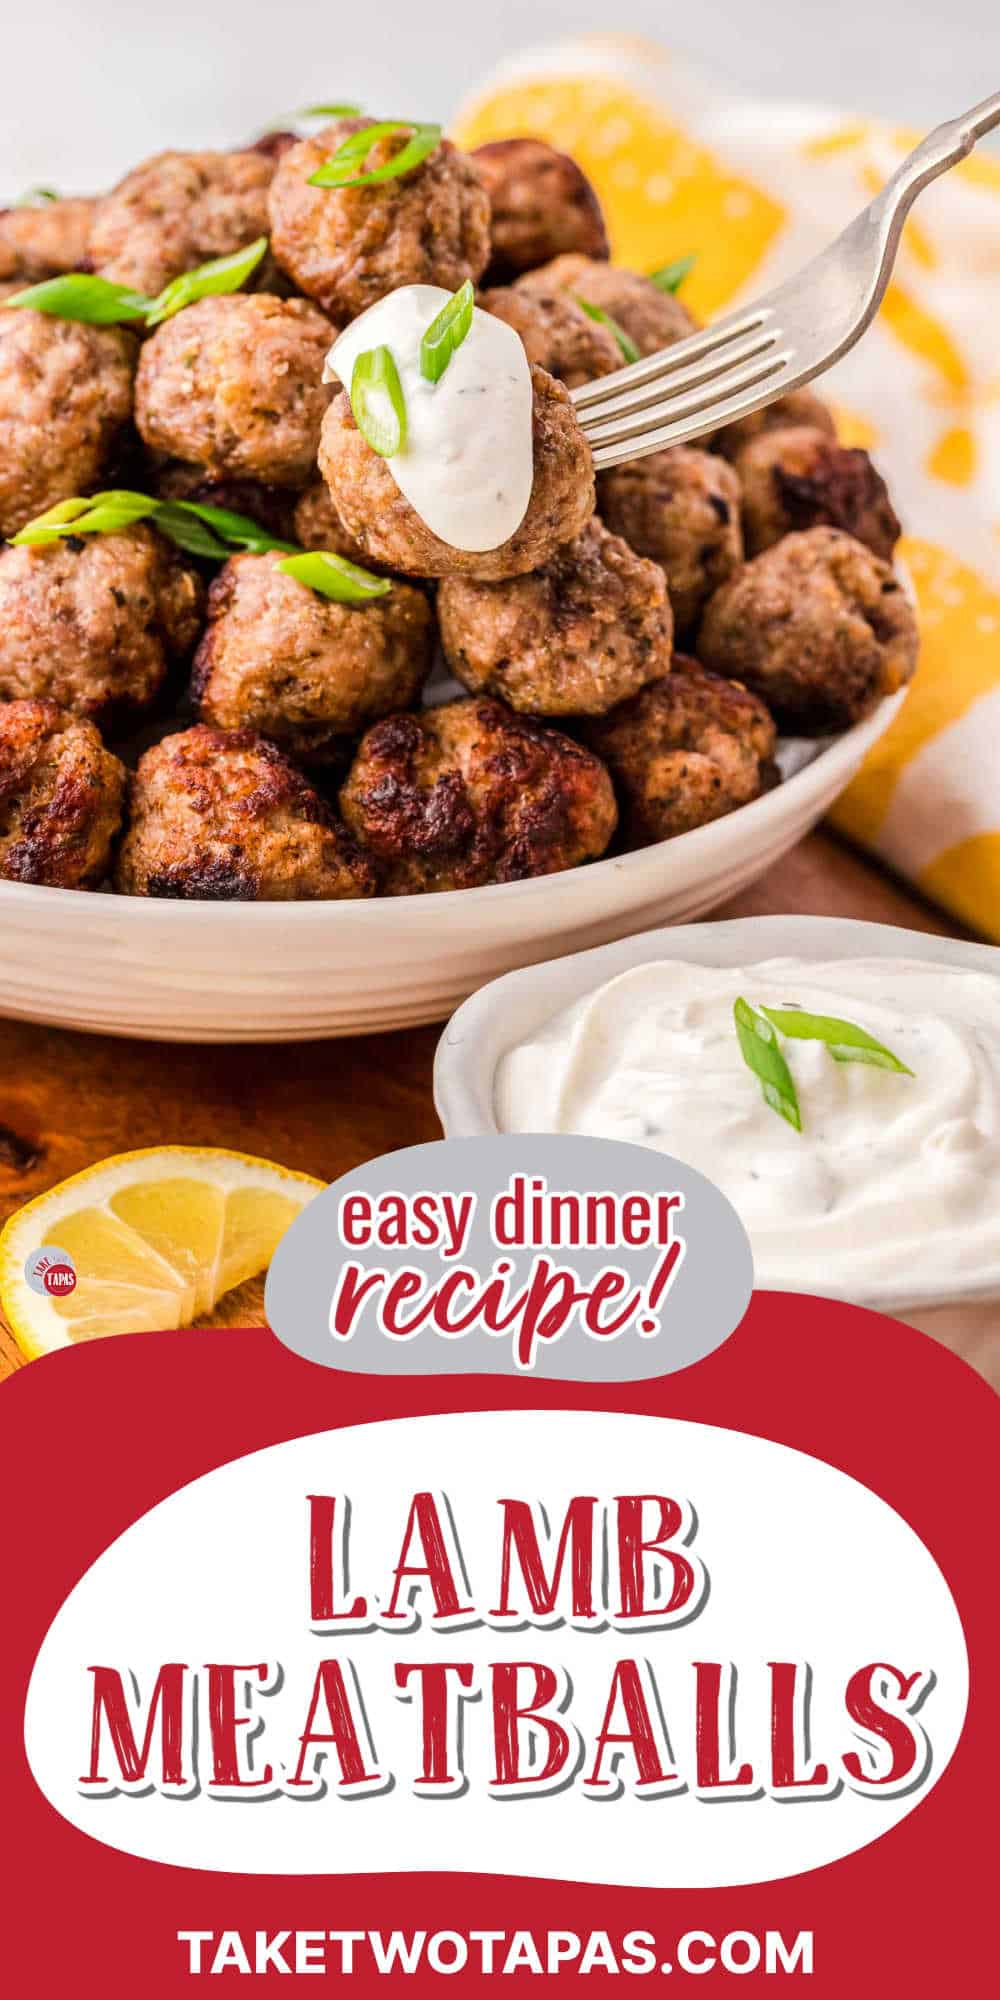 lamb meatballs and a red banner with text